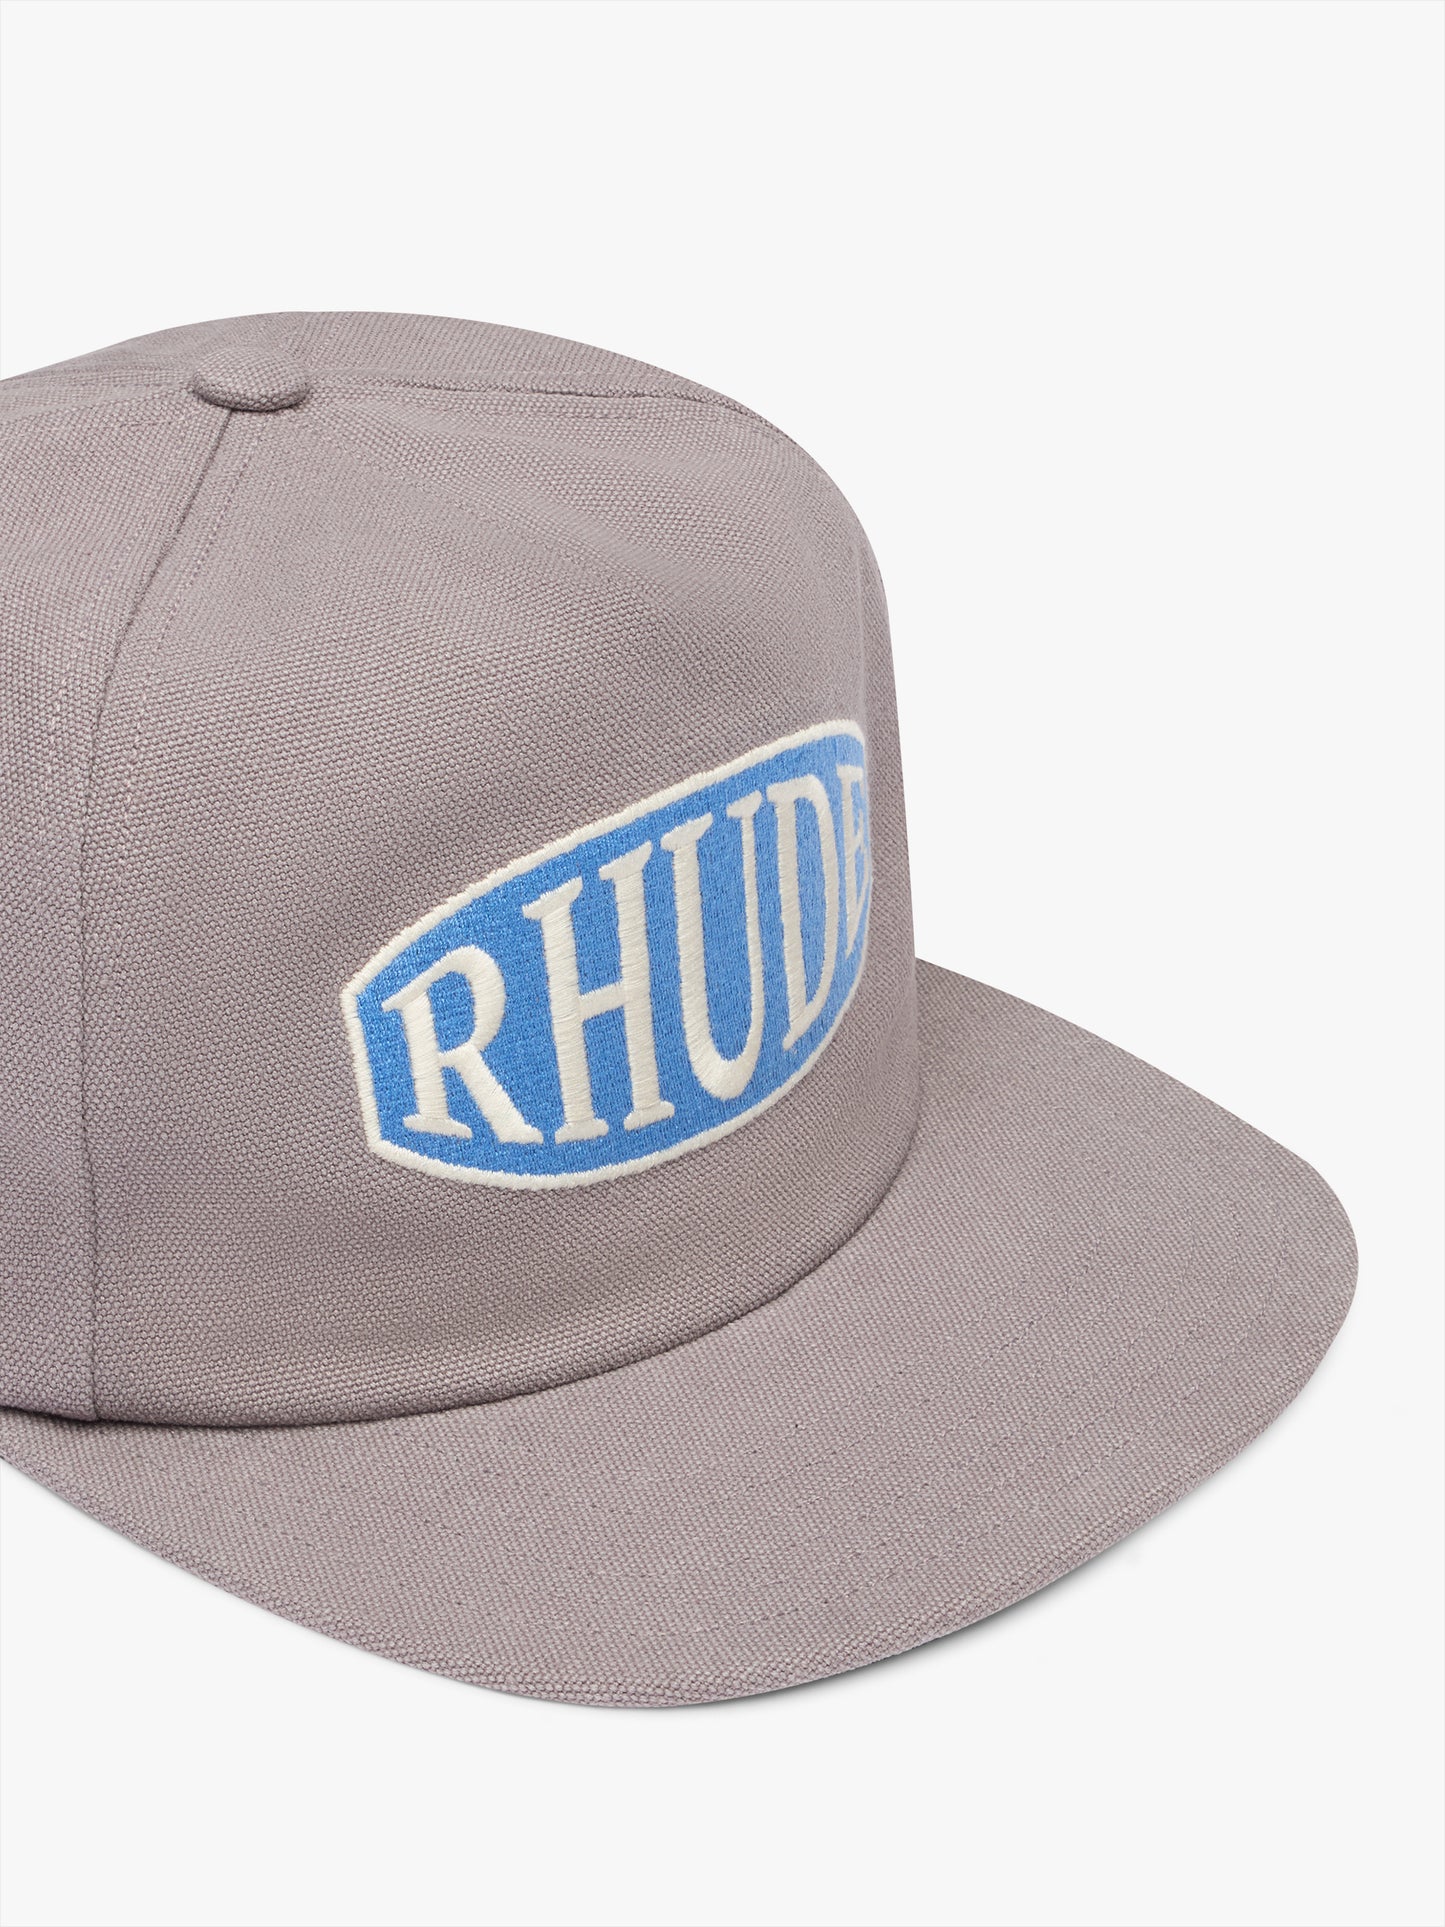 RHUDE RALLY WASHED CANVAS HAT